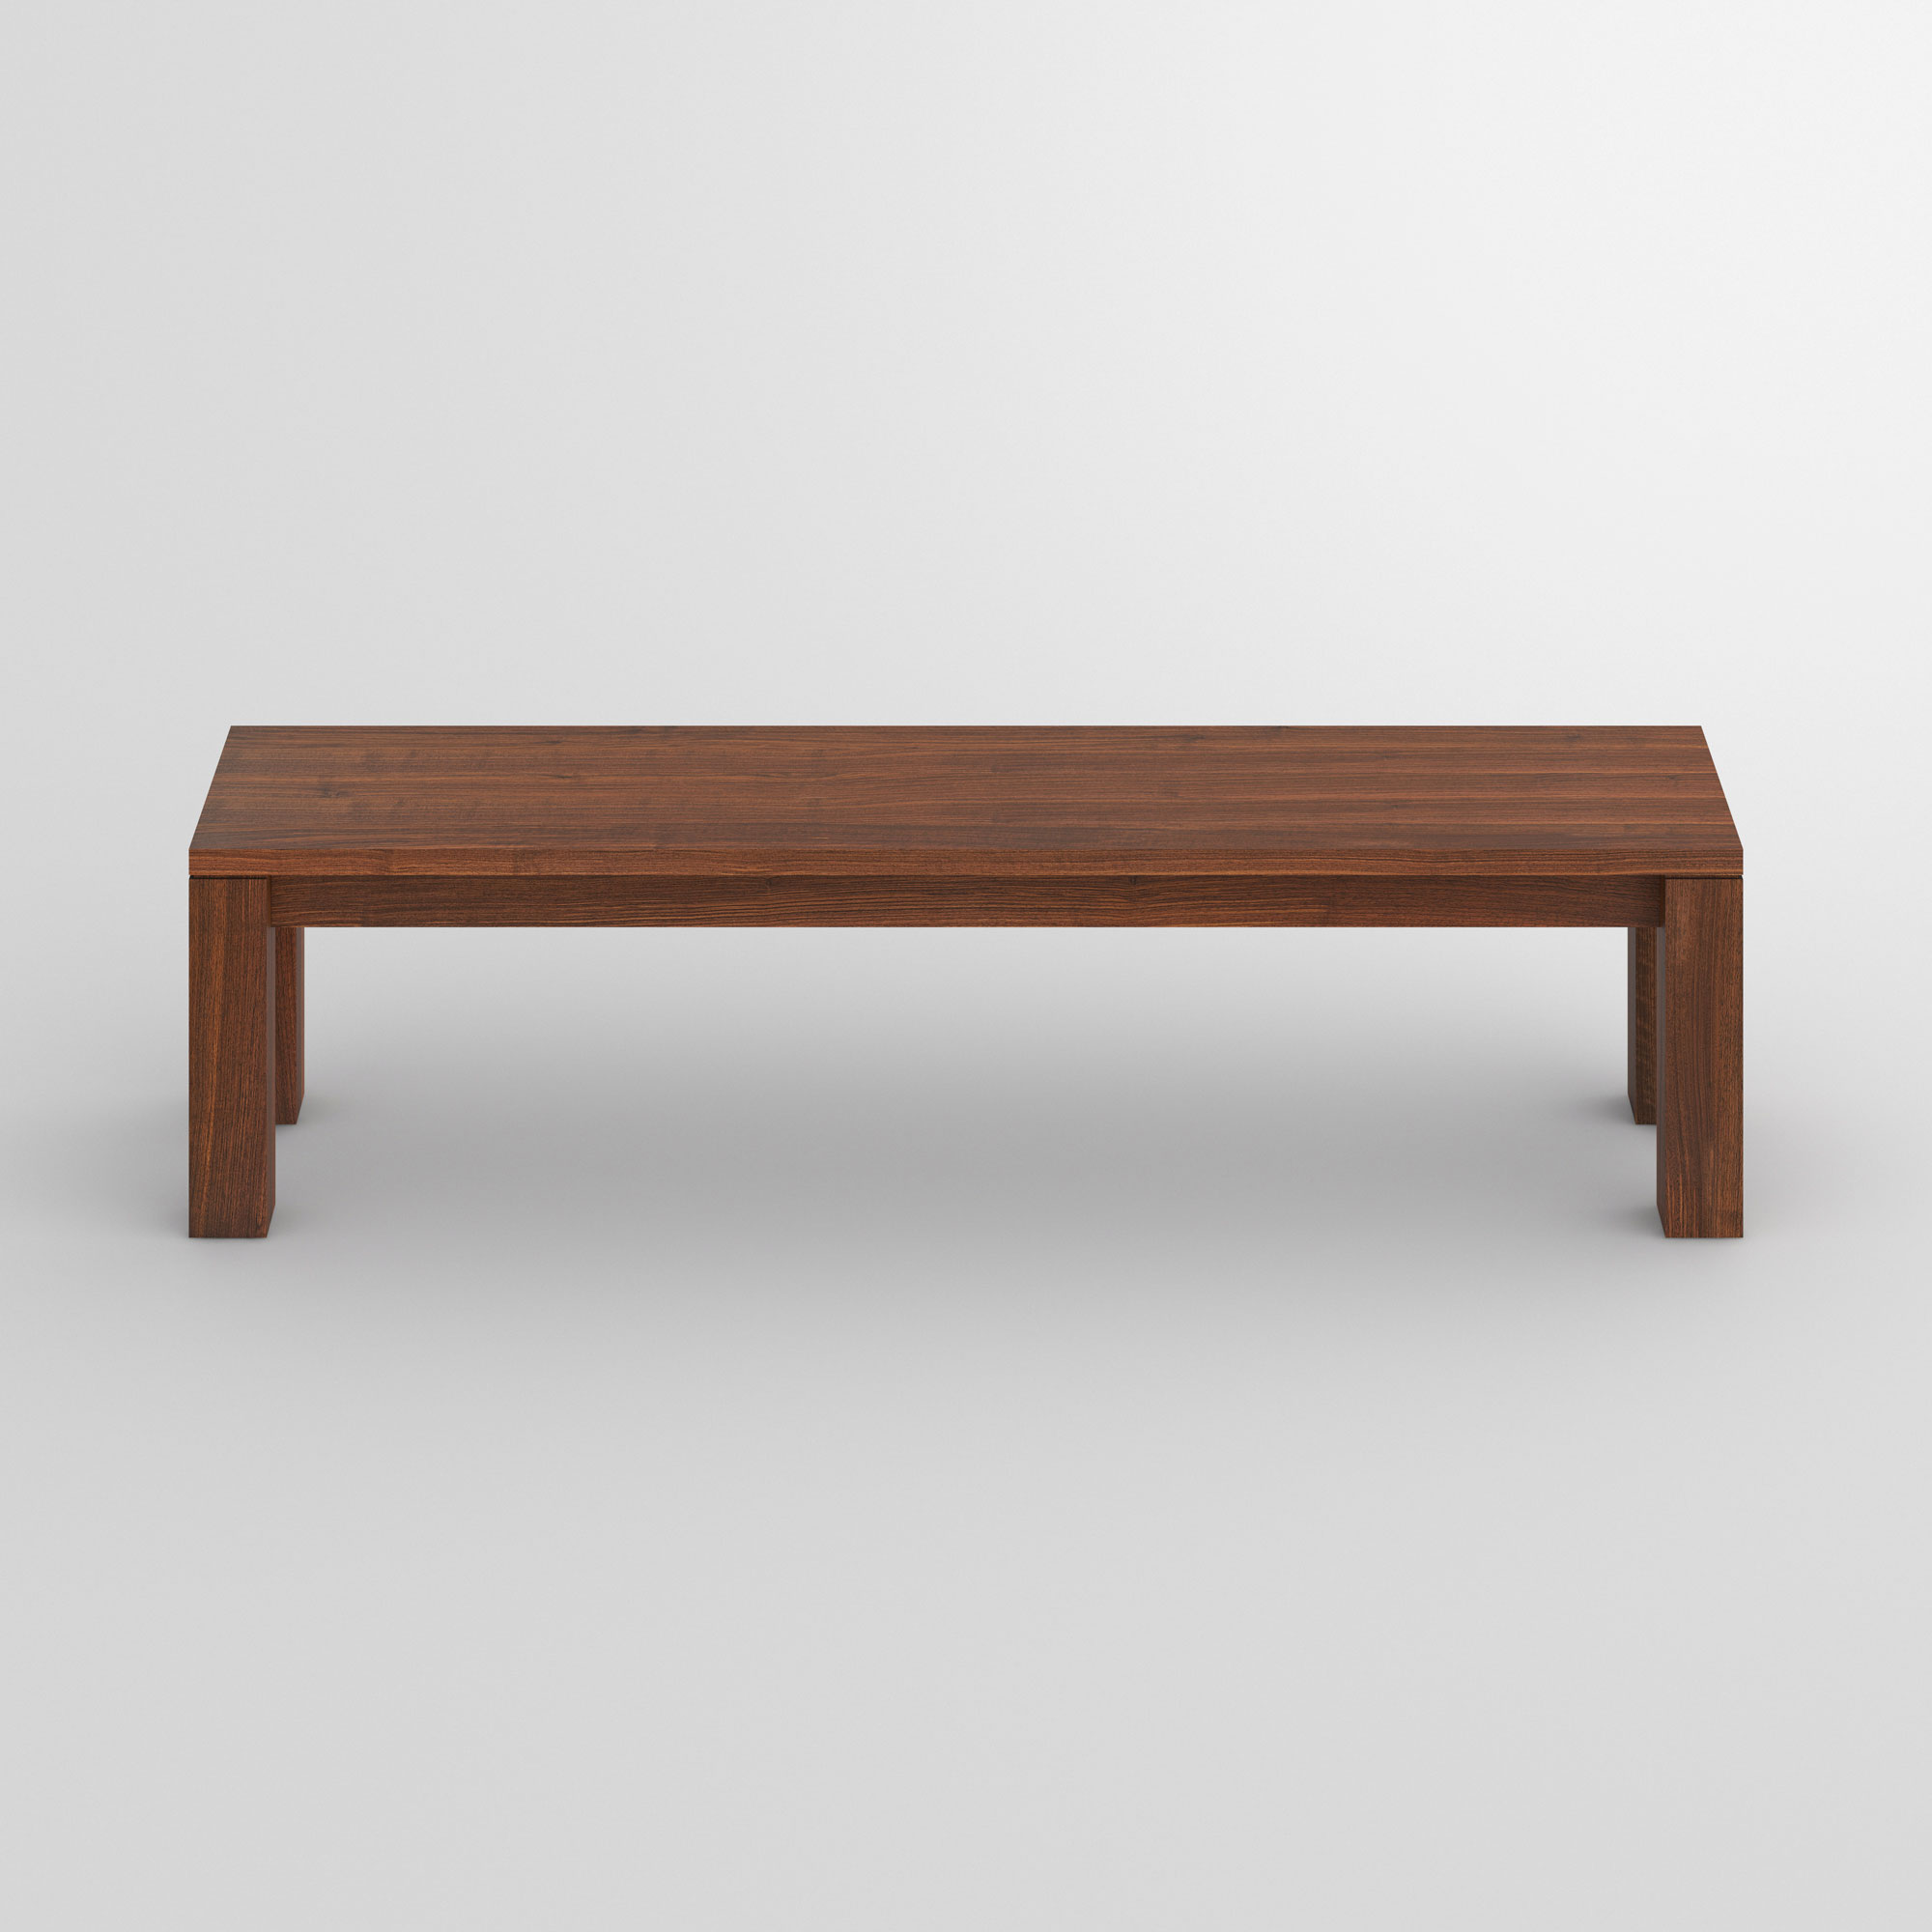 Wood Bench Rustic LIVING cam2 custom made in solid wood by vitamin design